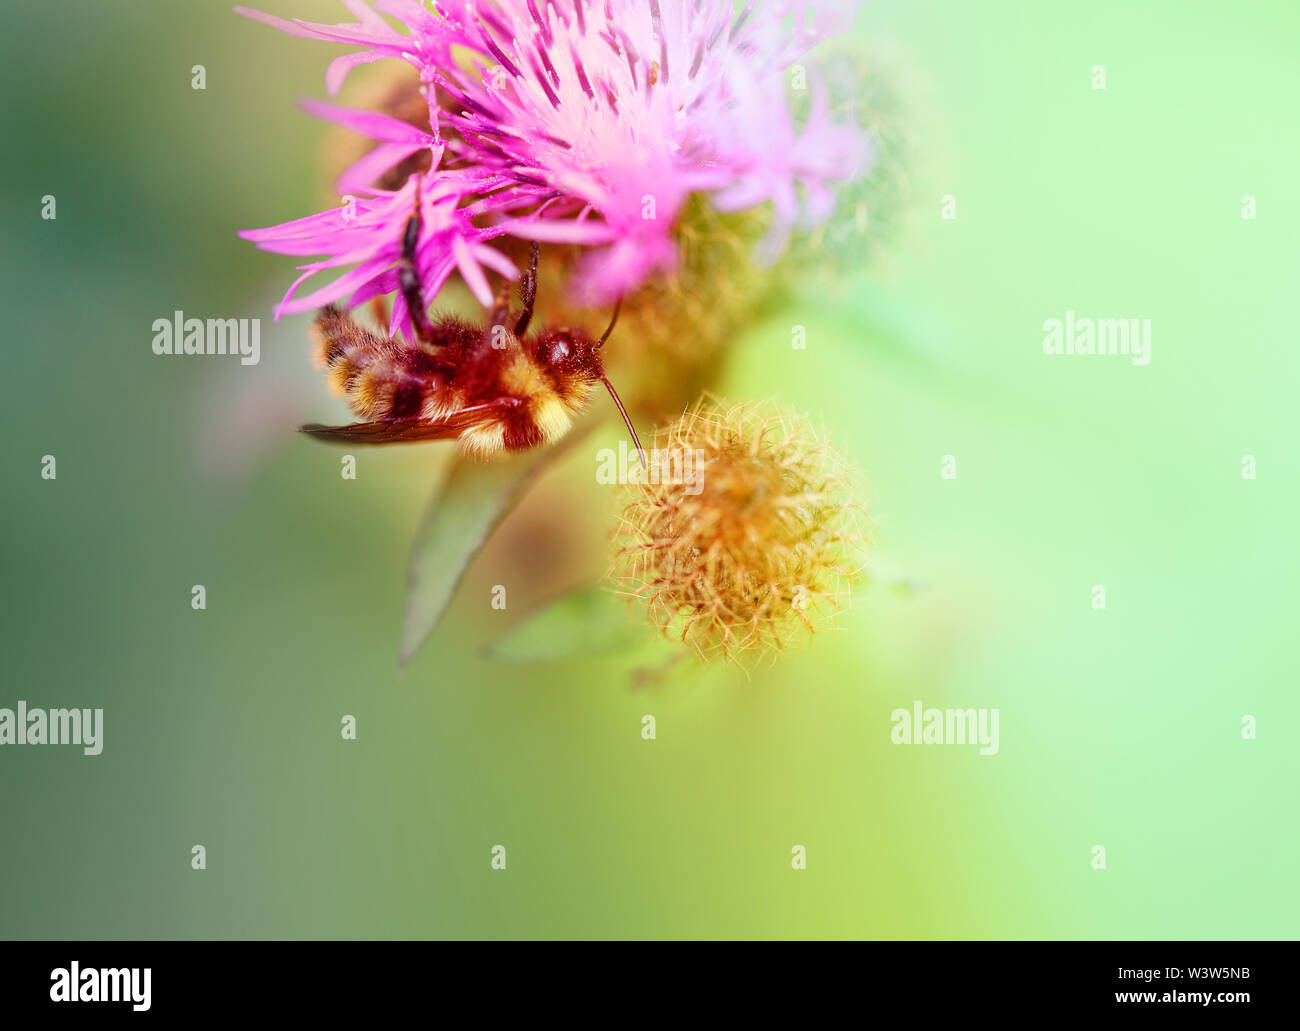 A beautiful photo of a bumblebee on a red flower Stock Photo